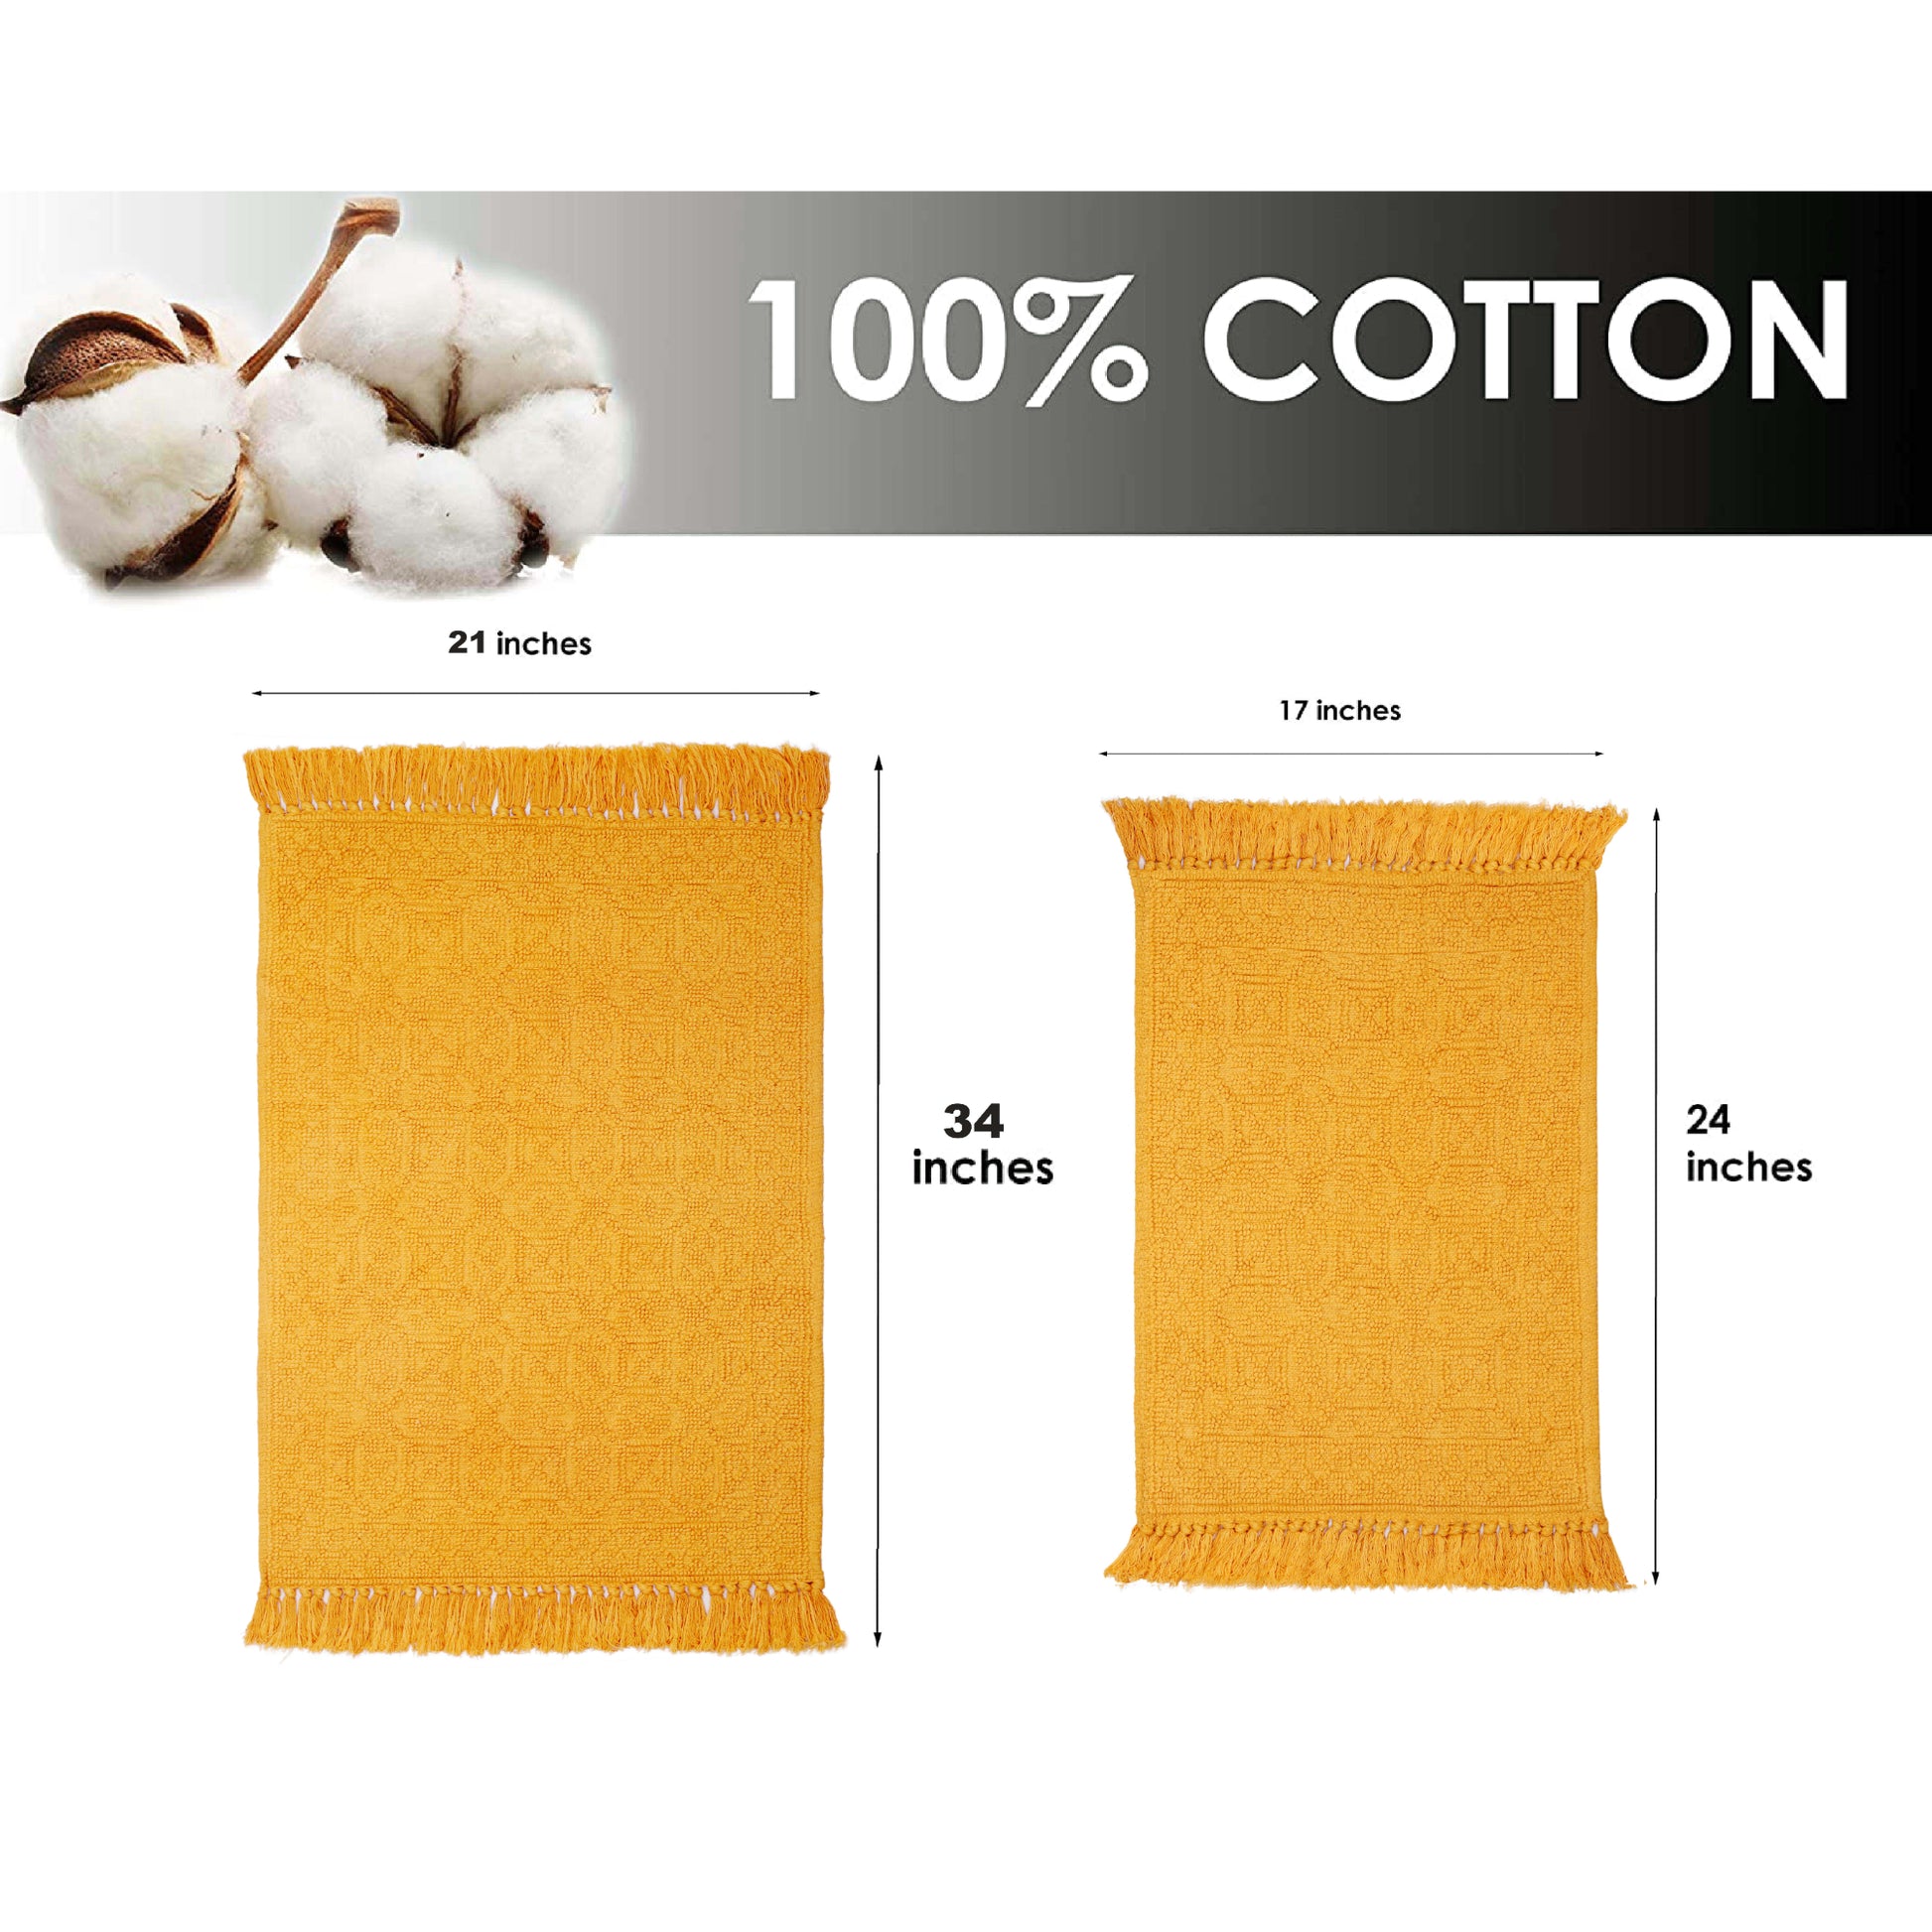 100% cotton hand woven water absorbent bathroom rugs (set of 2) - TreeWool Bathrugs#color_mustard